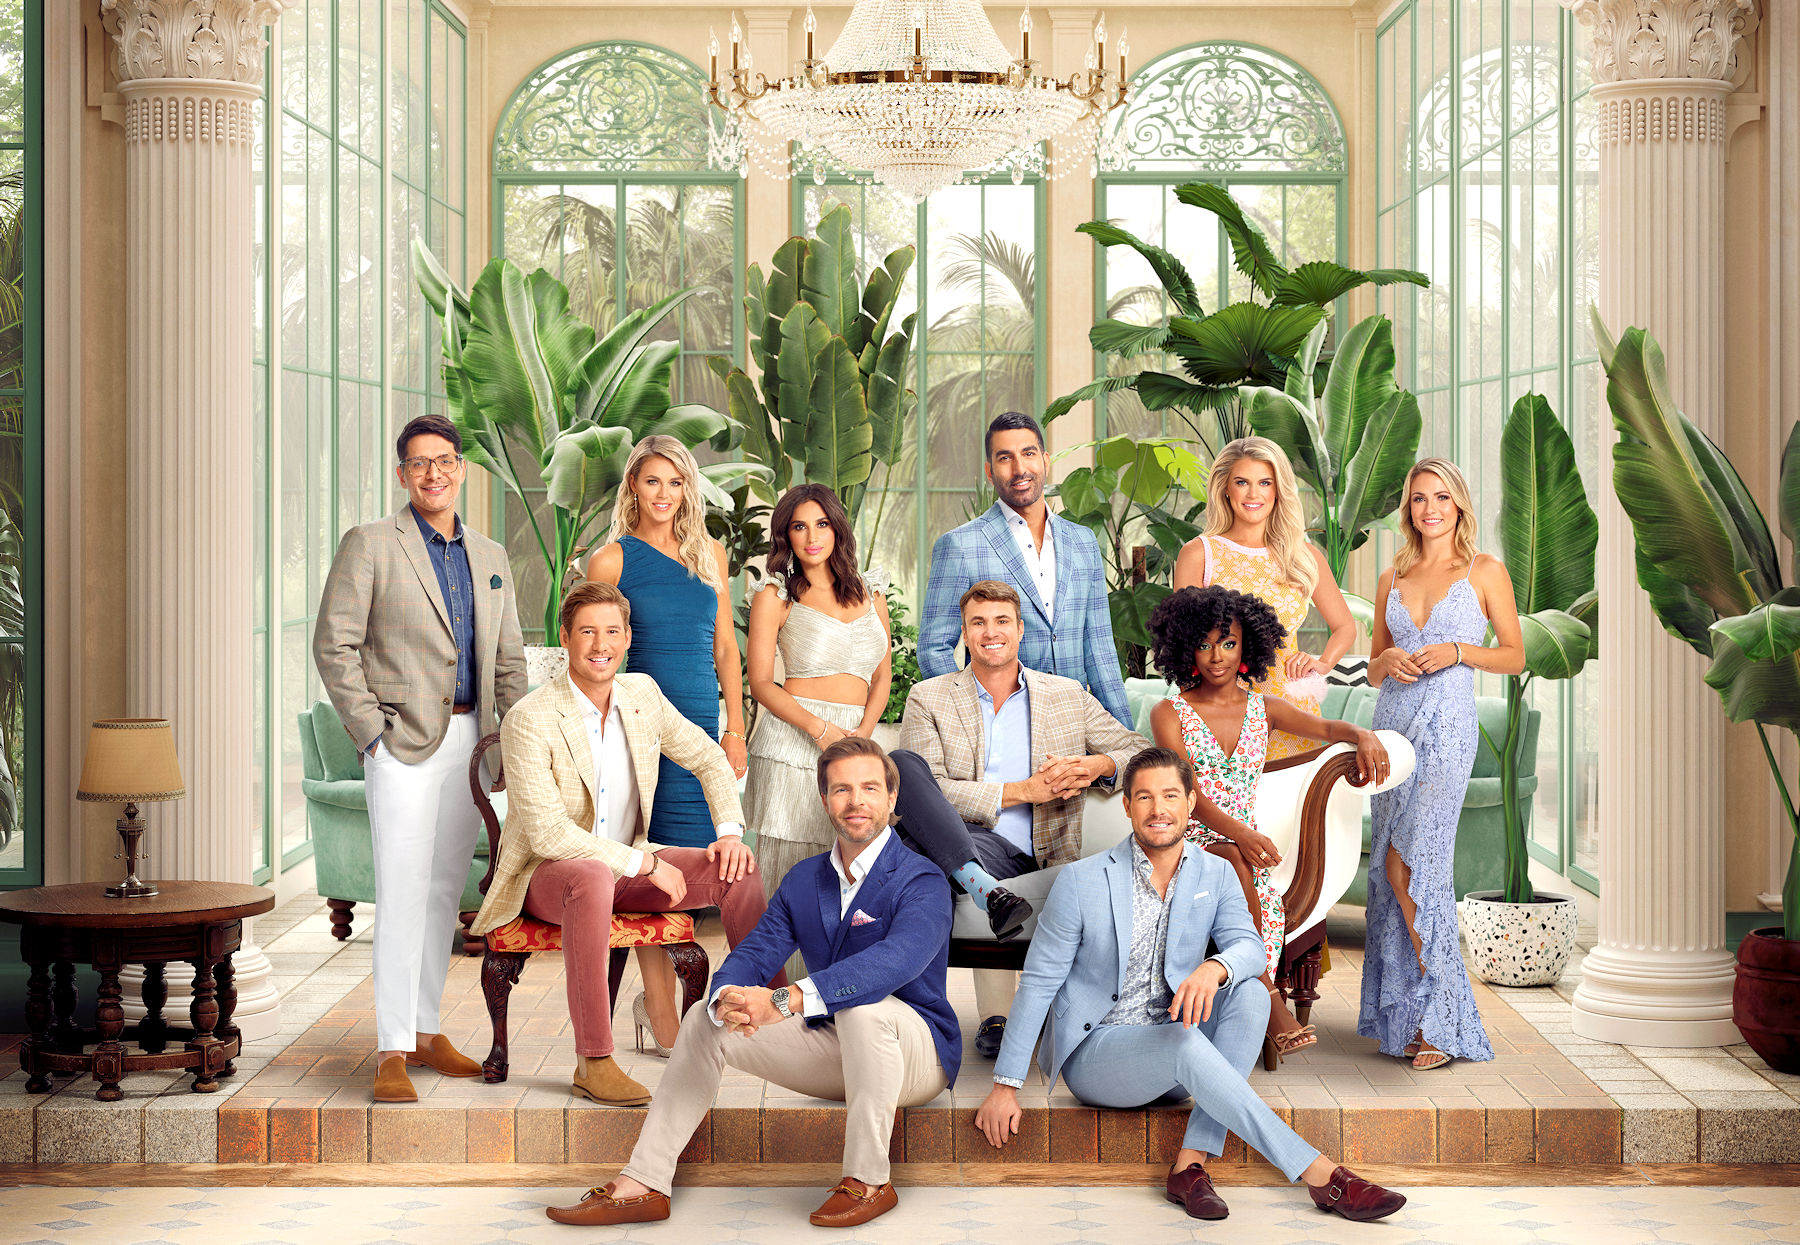 VIDEO: See Southern Charm Season 9 Trailer! Taylor is Accused of Hooking Up With Austen and Shep as Craig and Paige Feud Over Engagement Timeline, and Madison Teases Pregnancy, Plus a Nude Pic is Revealed